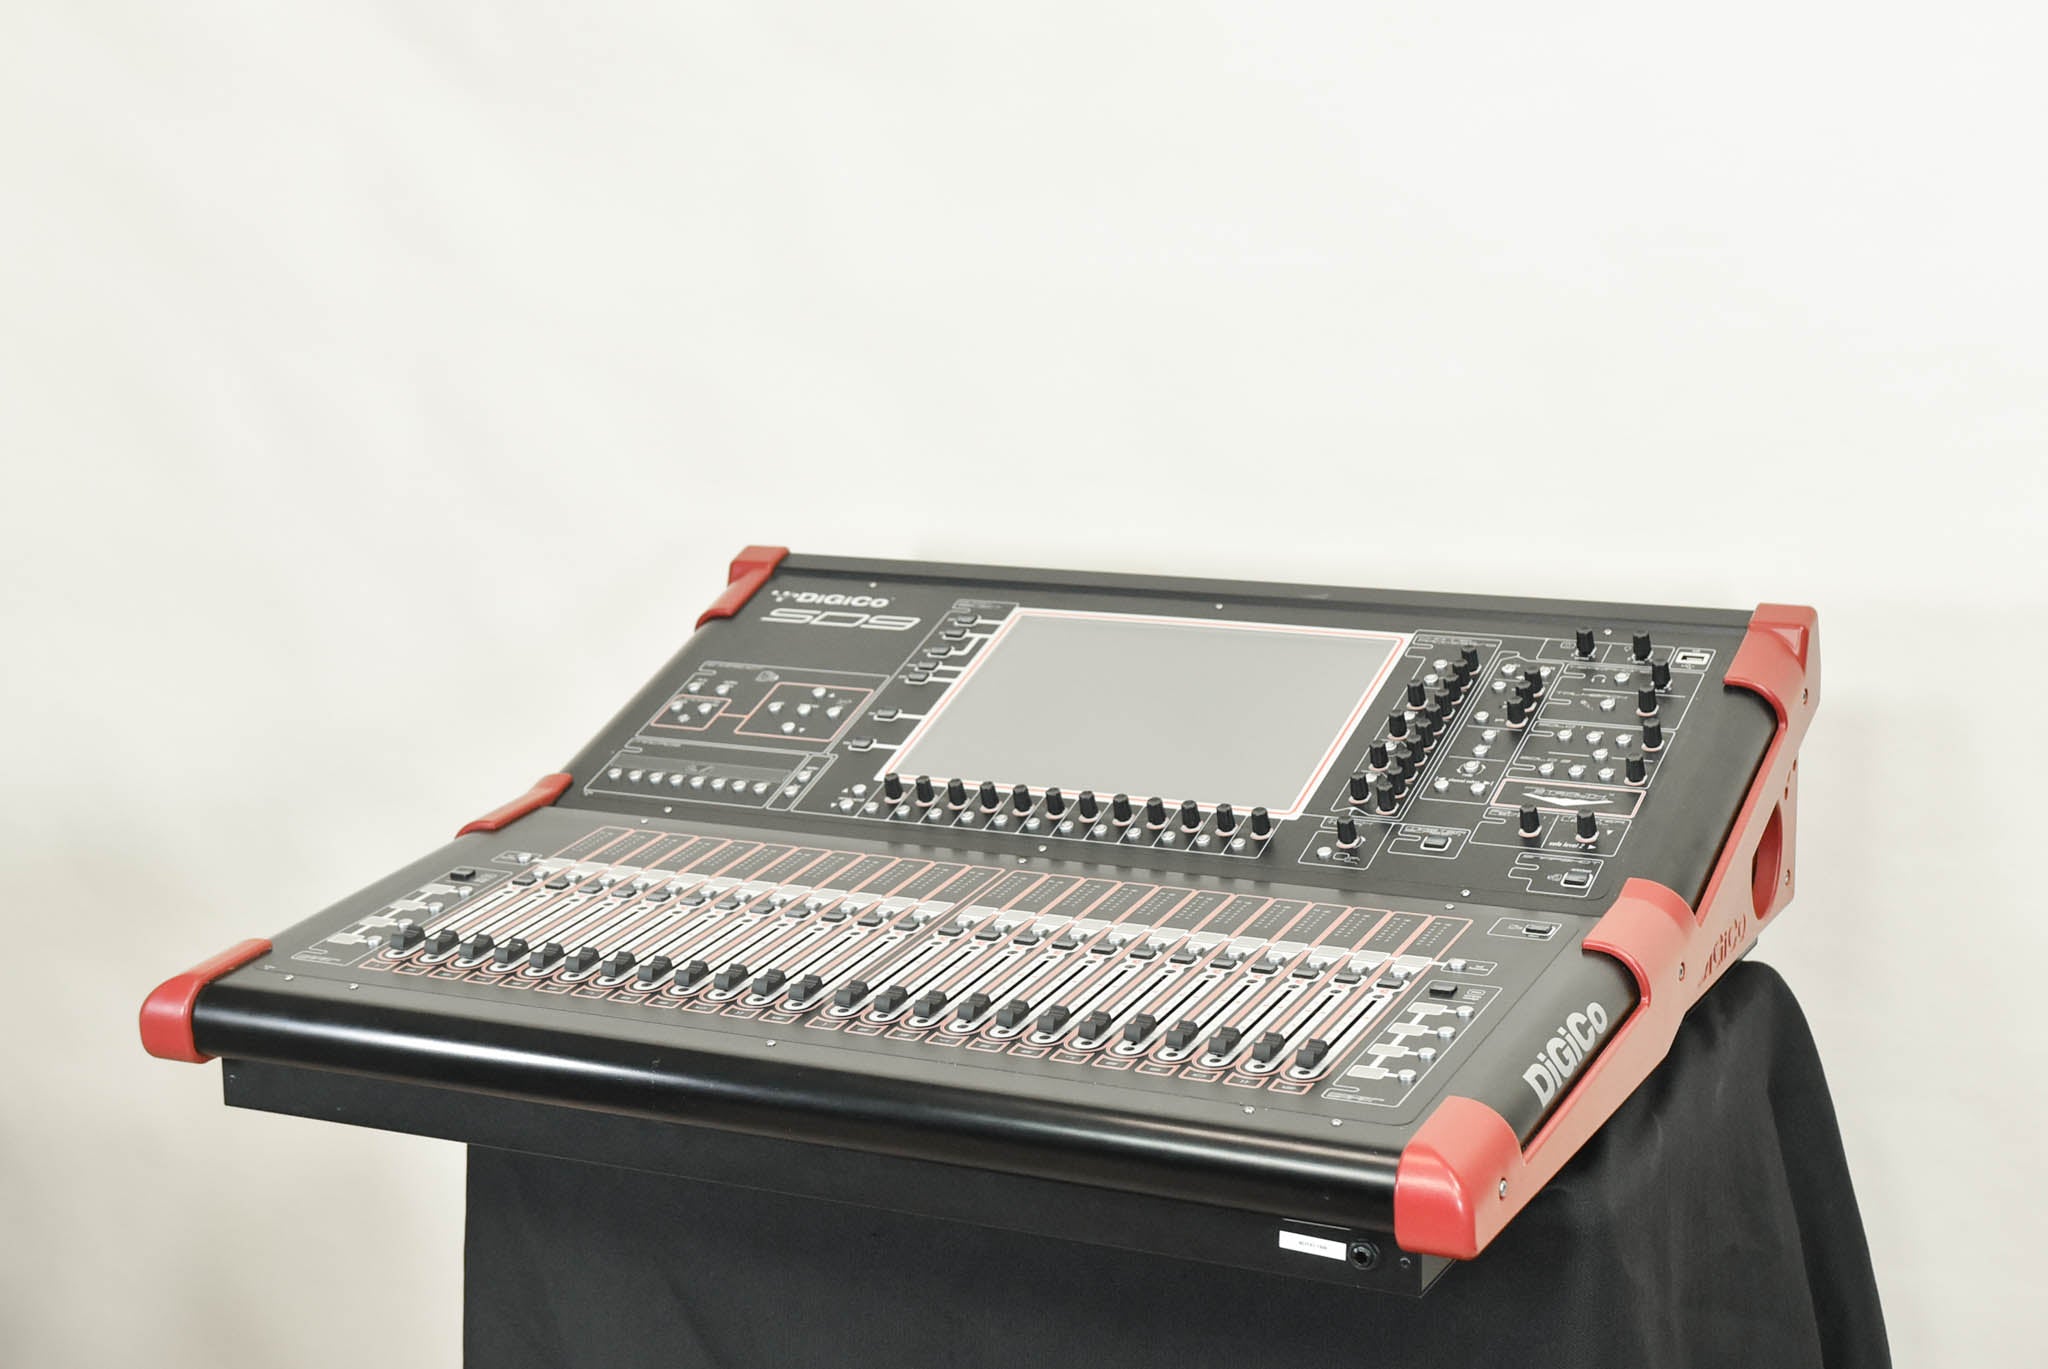 DiGiCo SD9 Digital Mixing Console with two D-Racks